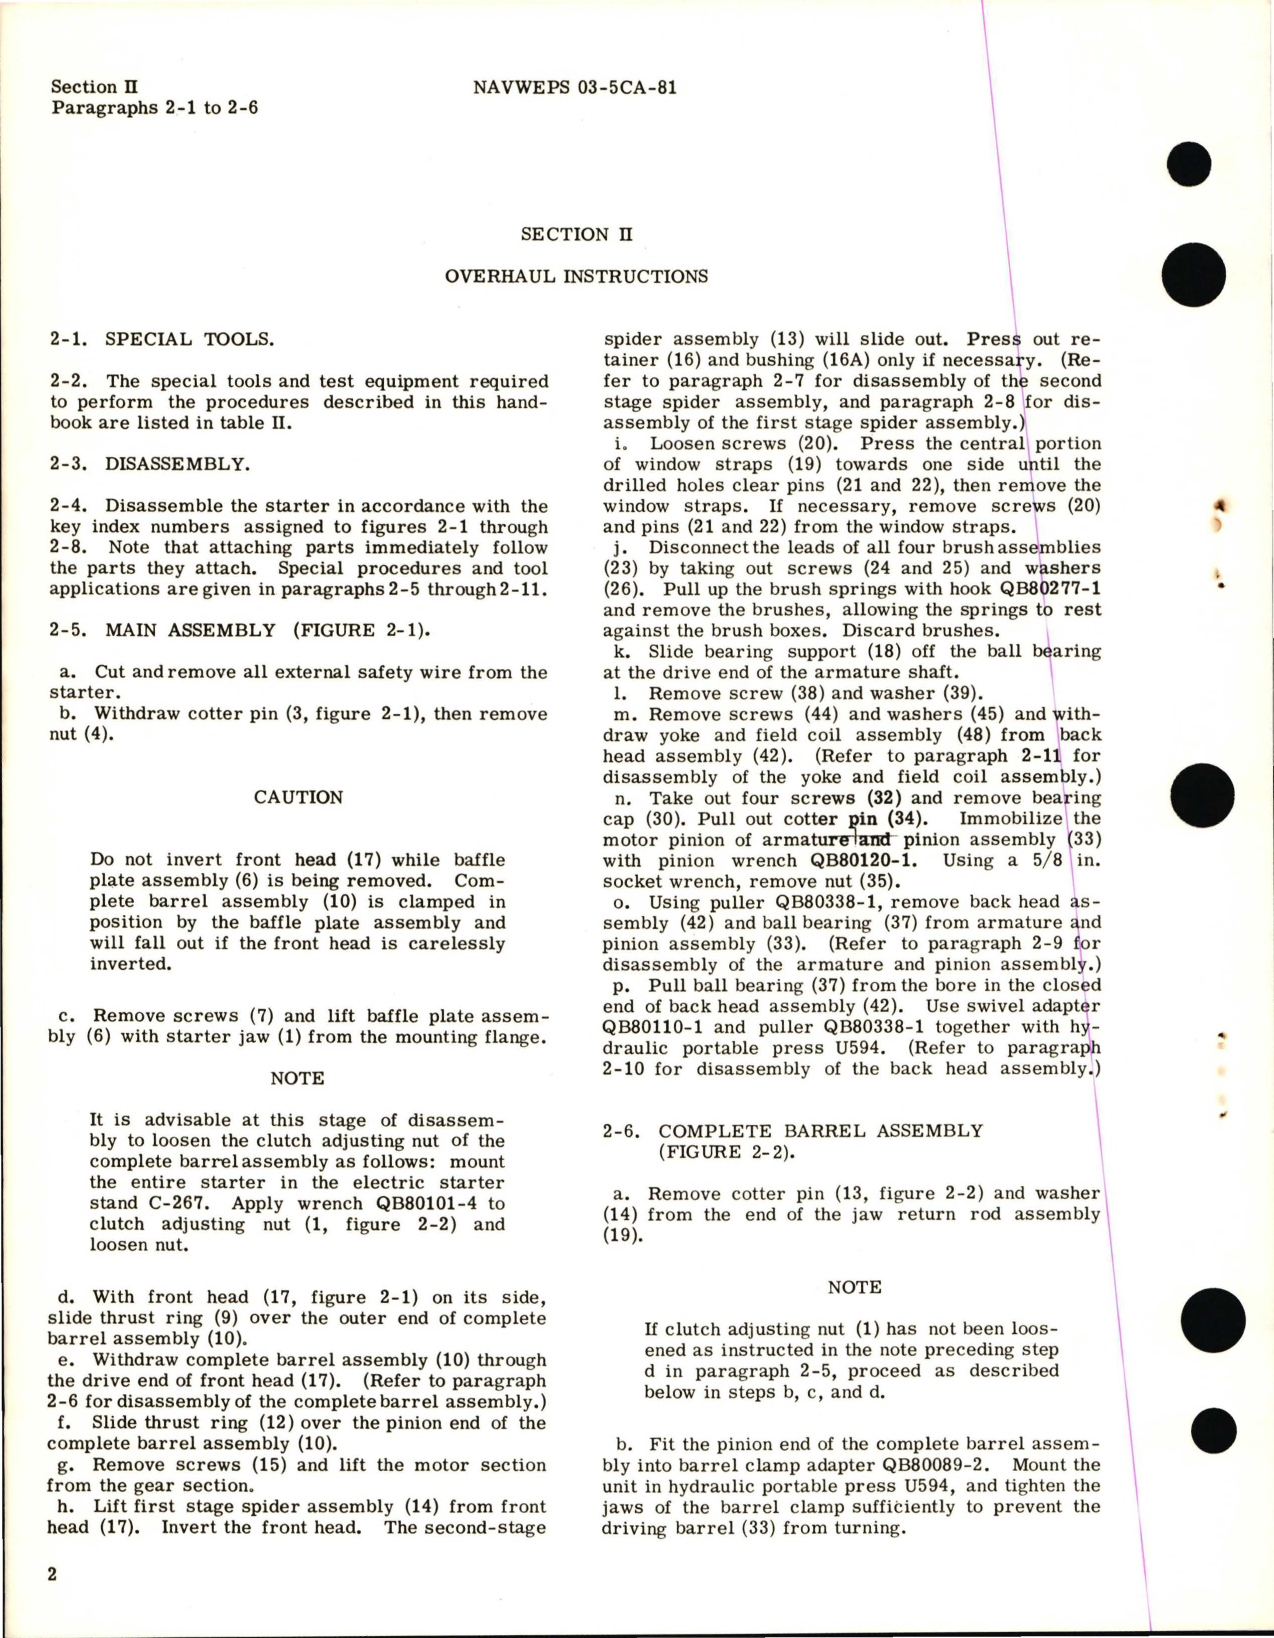 Sample page 8 from AirCorps Library document: Overhaul Instructions for Direct-Cranking Electric Starter Part 1416 Series and 36E00 Series 